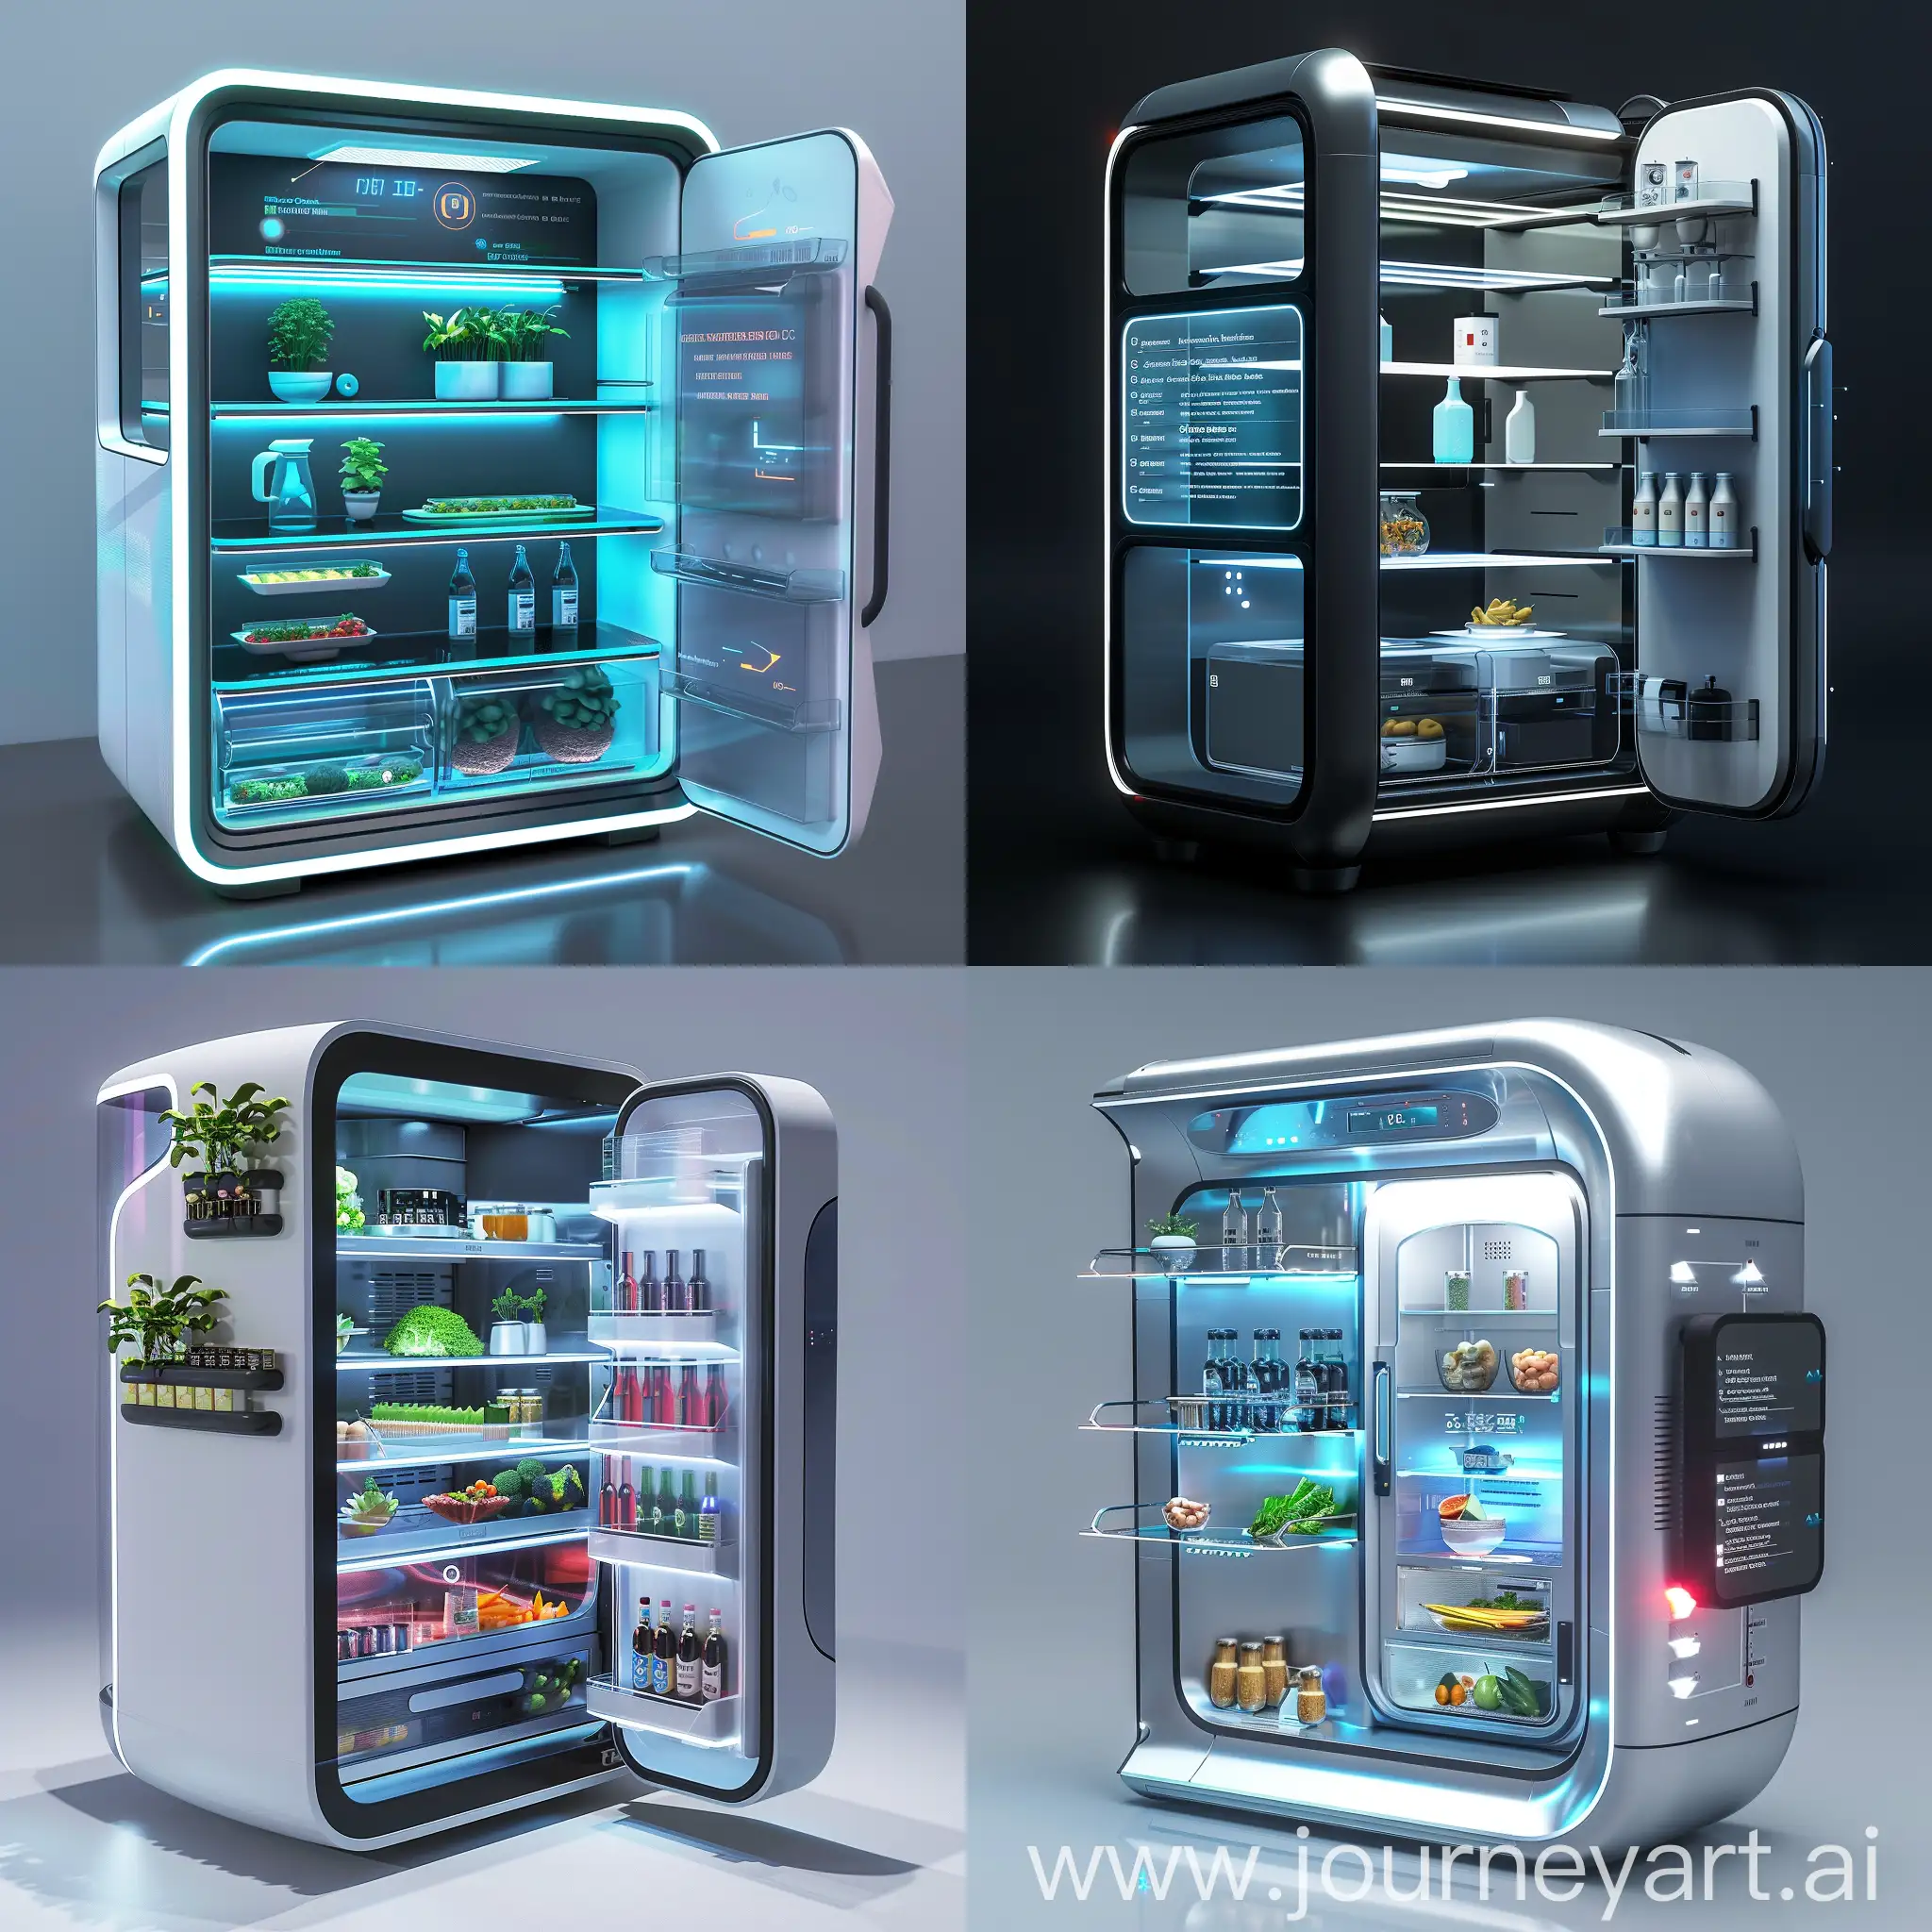 Futuristic-Smart-Fridge-with-OLED-Displays-and-AI-Personal-Assistant